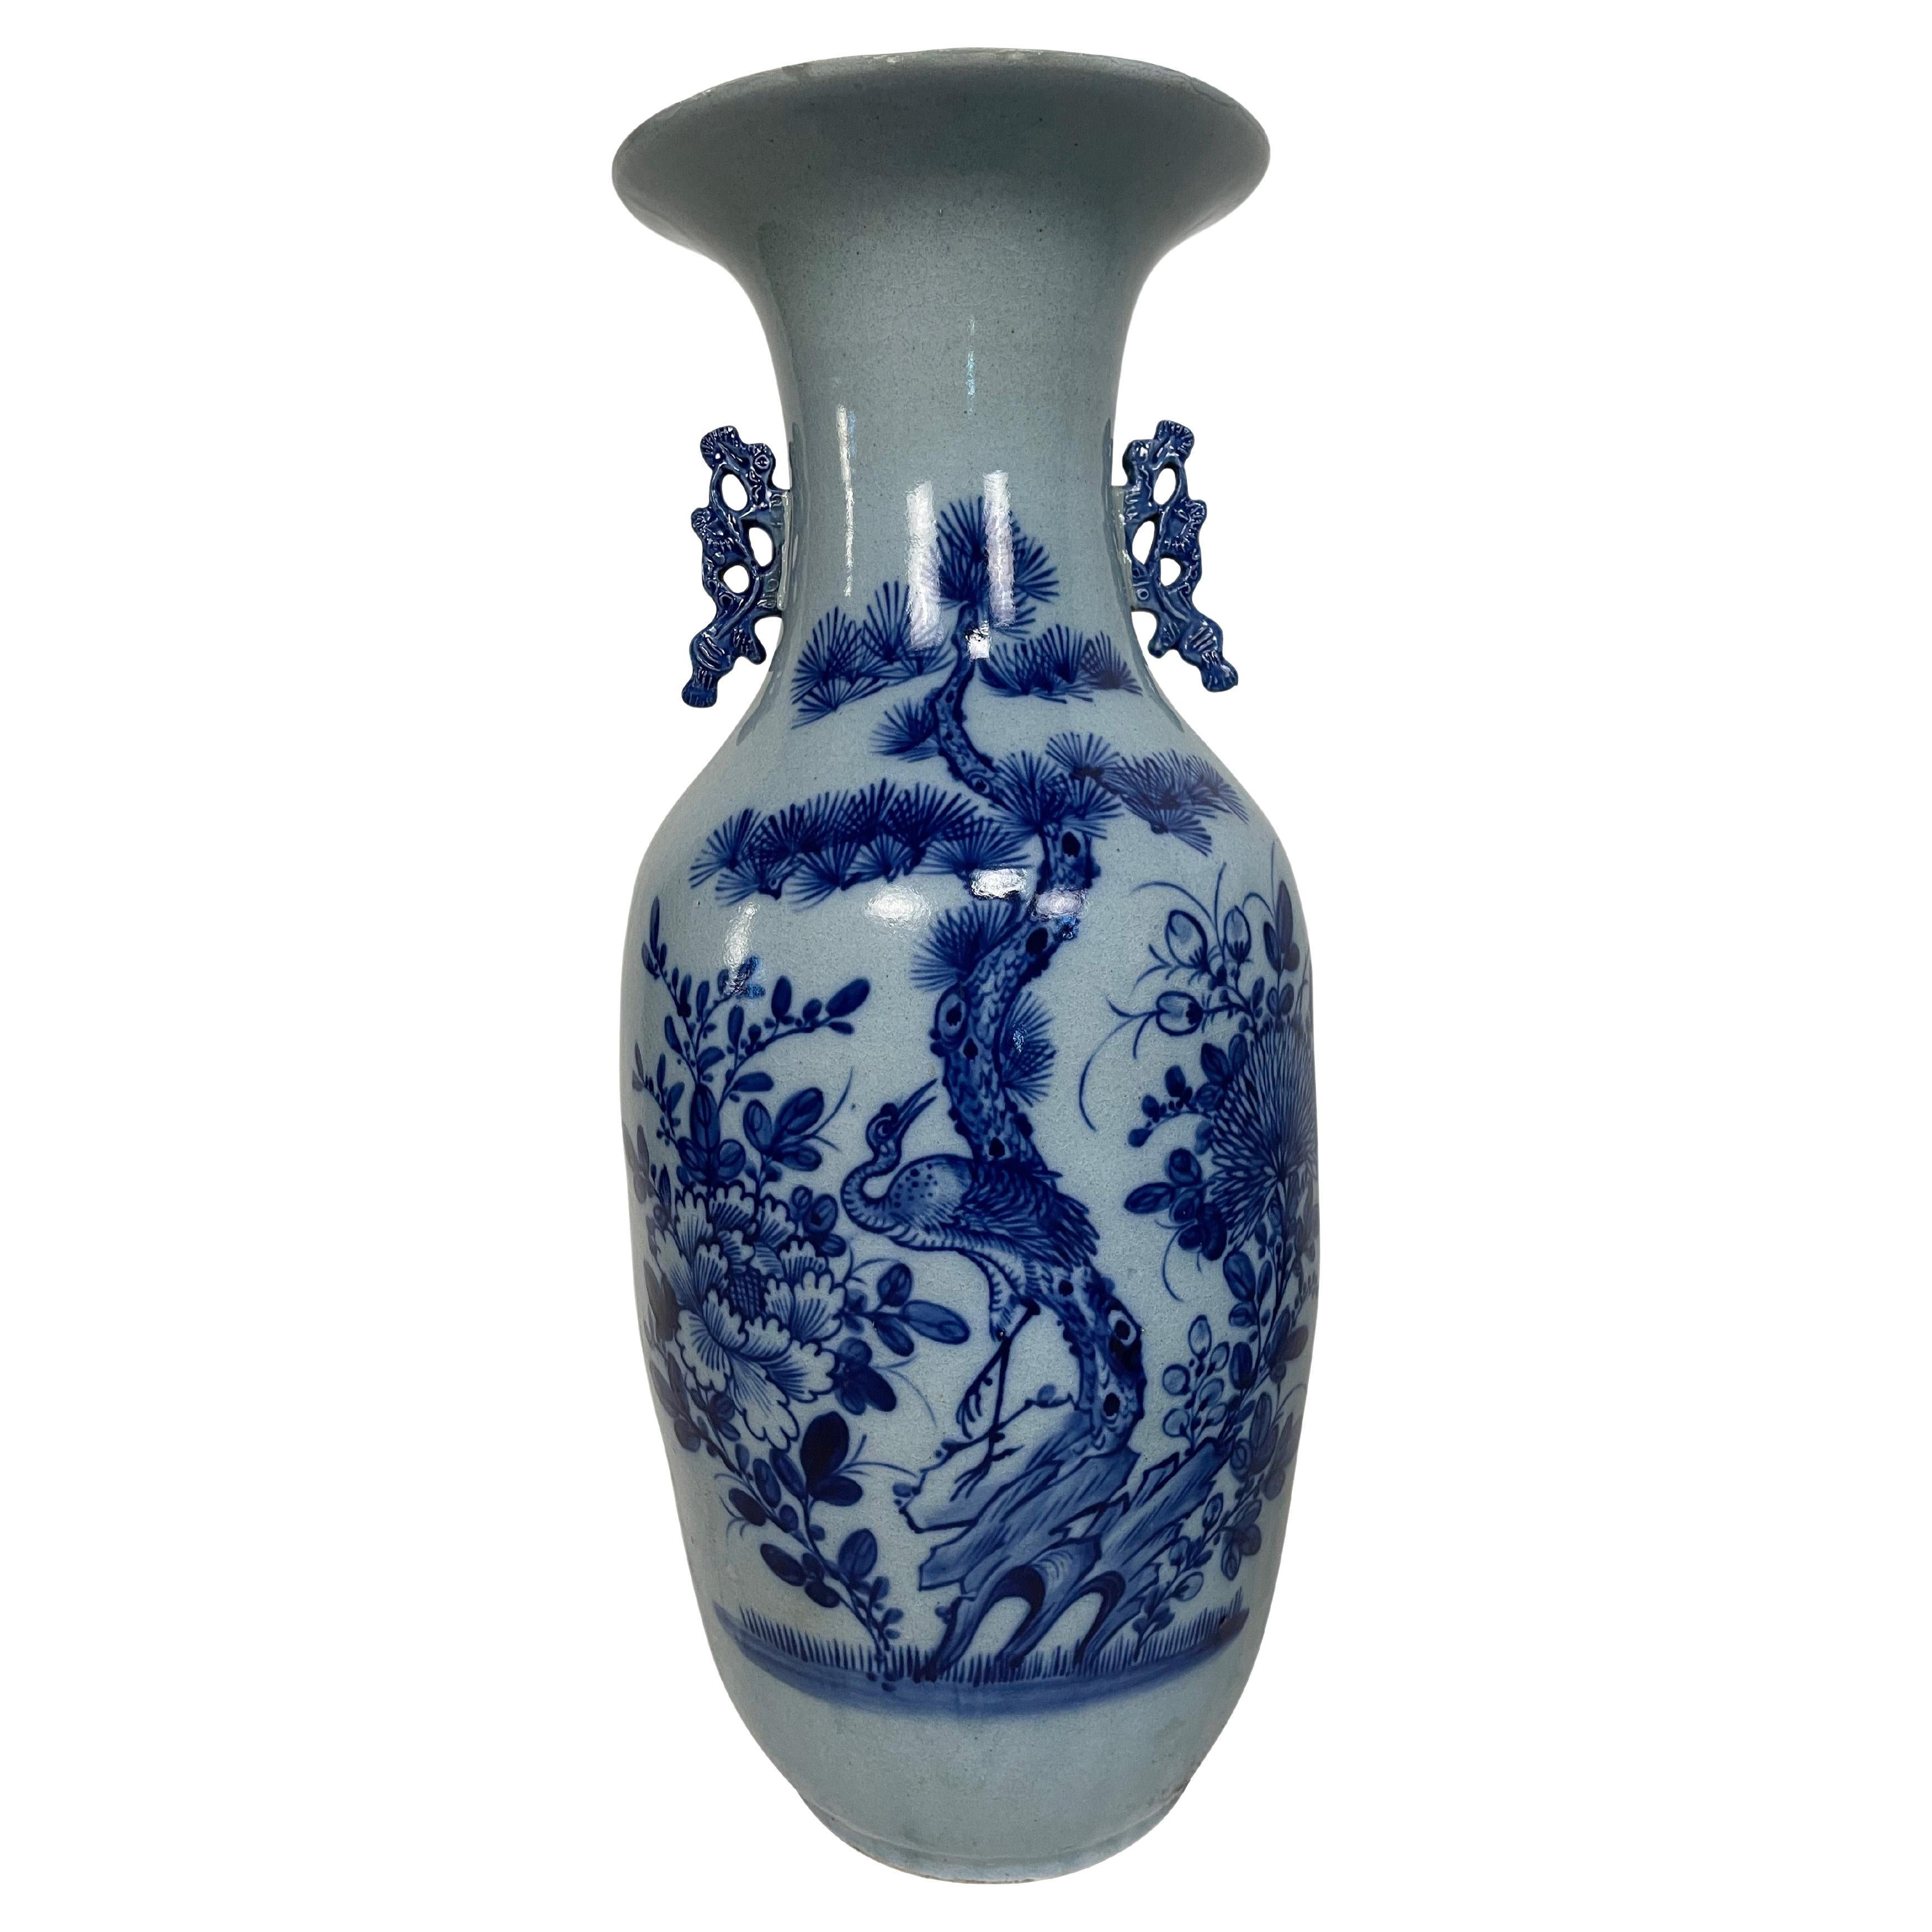 A fine antique 19th-century Chinese porcelain large baluster vase decorated with various flowers and objects in low relief and underglaze cobalt blue within a white-glazed ground. The vase has molded stylized handles in cobalt blue to either side of